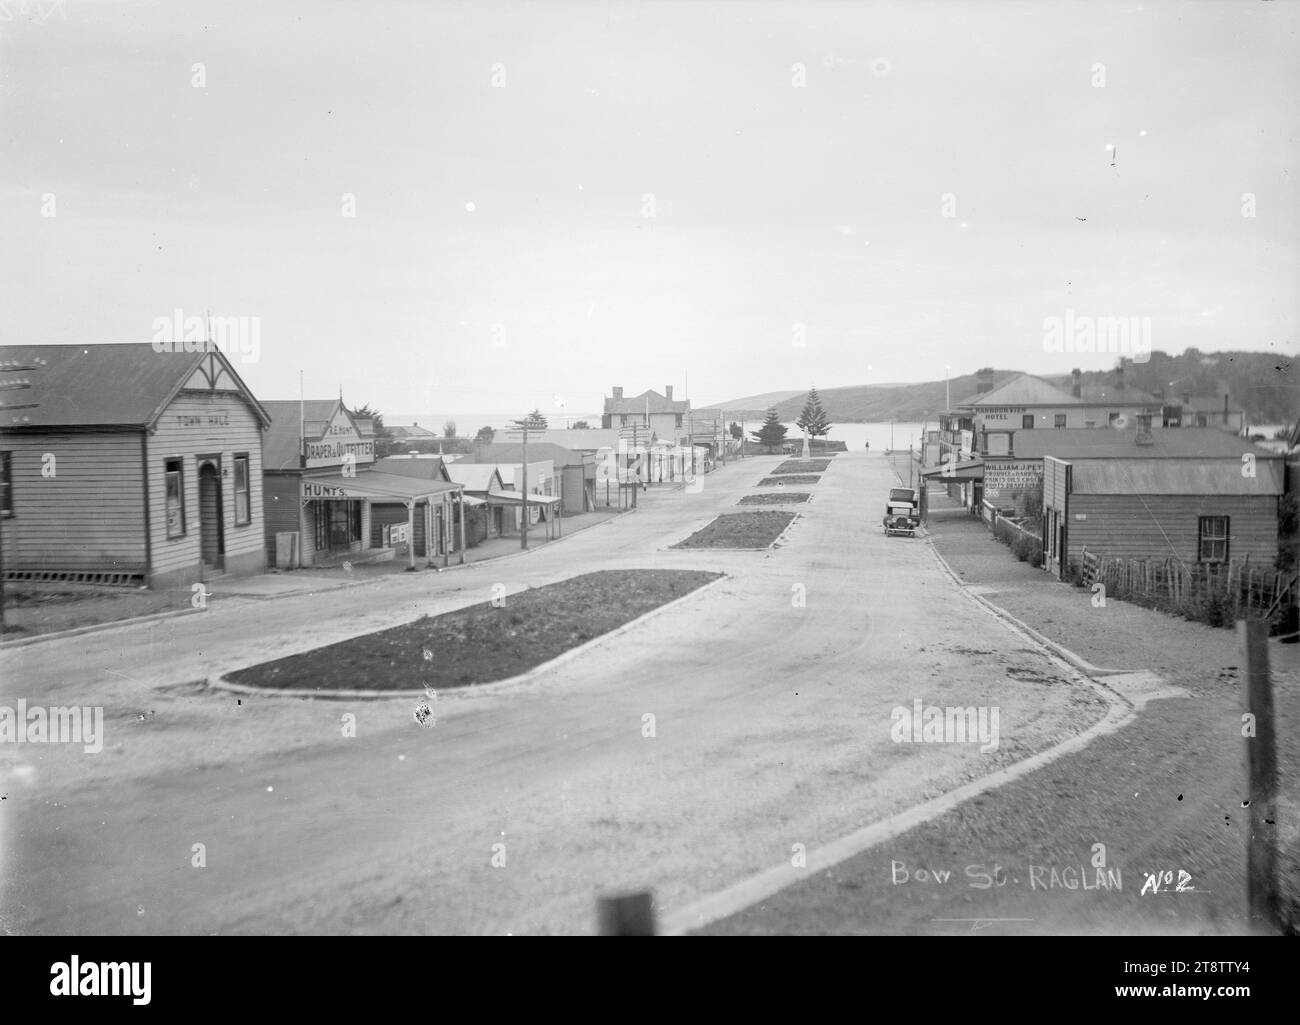 Bow Street, Raglan, New Zealand, circa 1920s, Bow Street, Raglan, New Zealand. Taken circa 1920s. The Raglan, New Zealand Town hall is on the left, with the premises of R E Hunt, Draper & Outfitter, next door. On the right the Harbour View Hotel is visible with the premises of William J Petchell partially visible Stock Photo